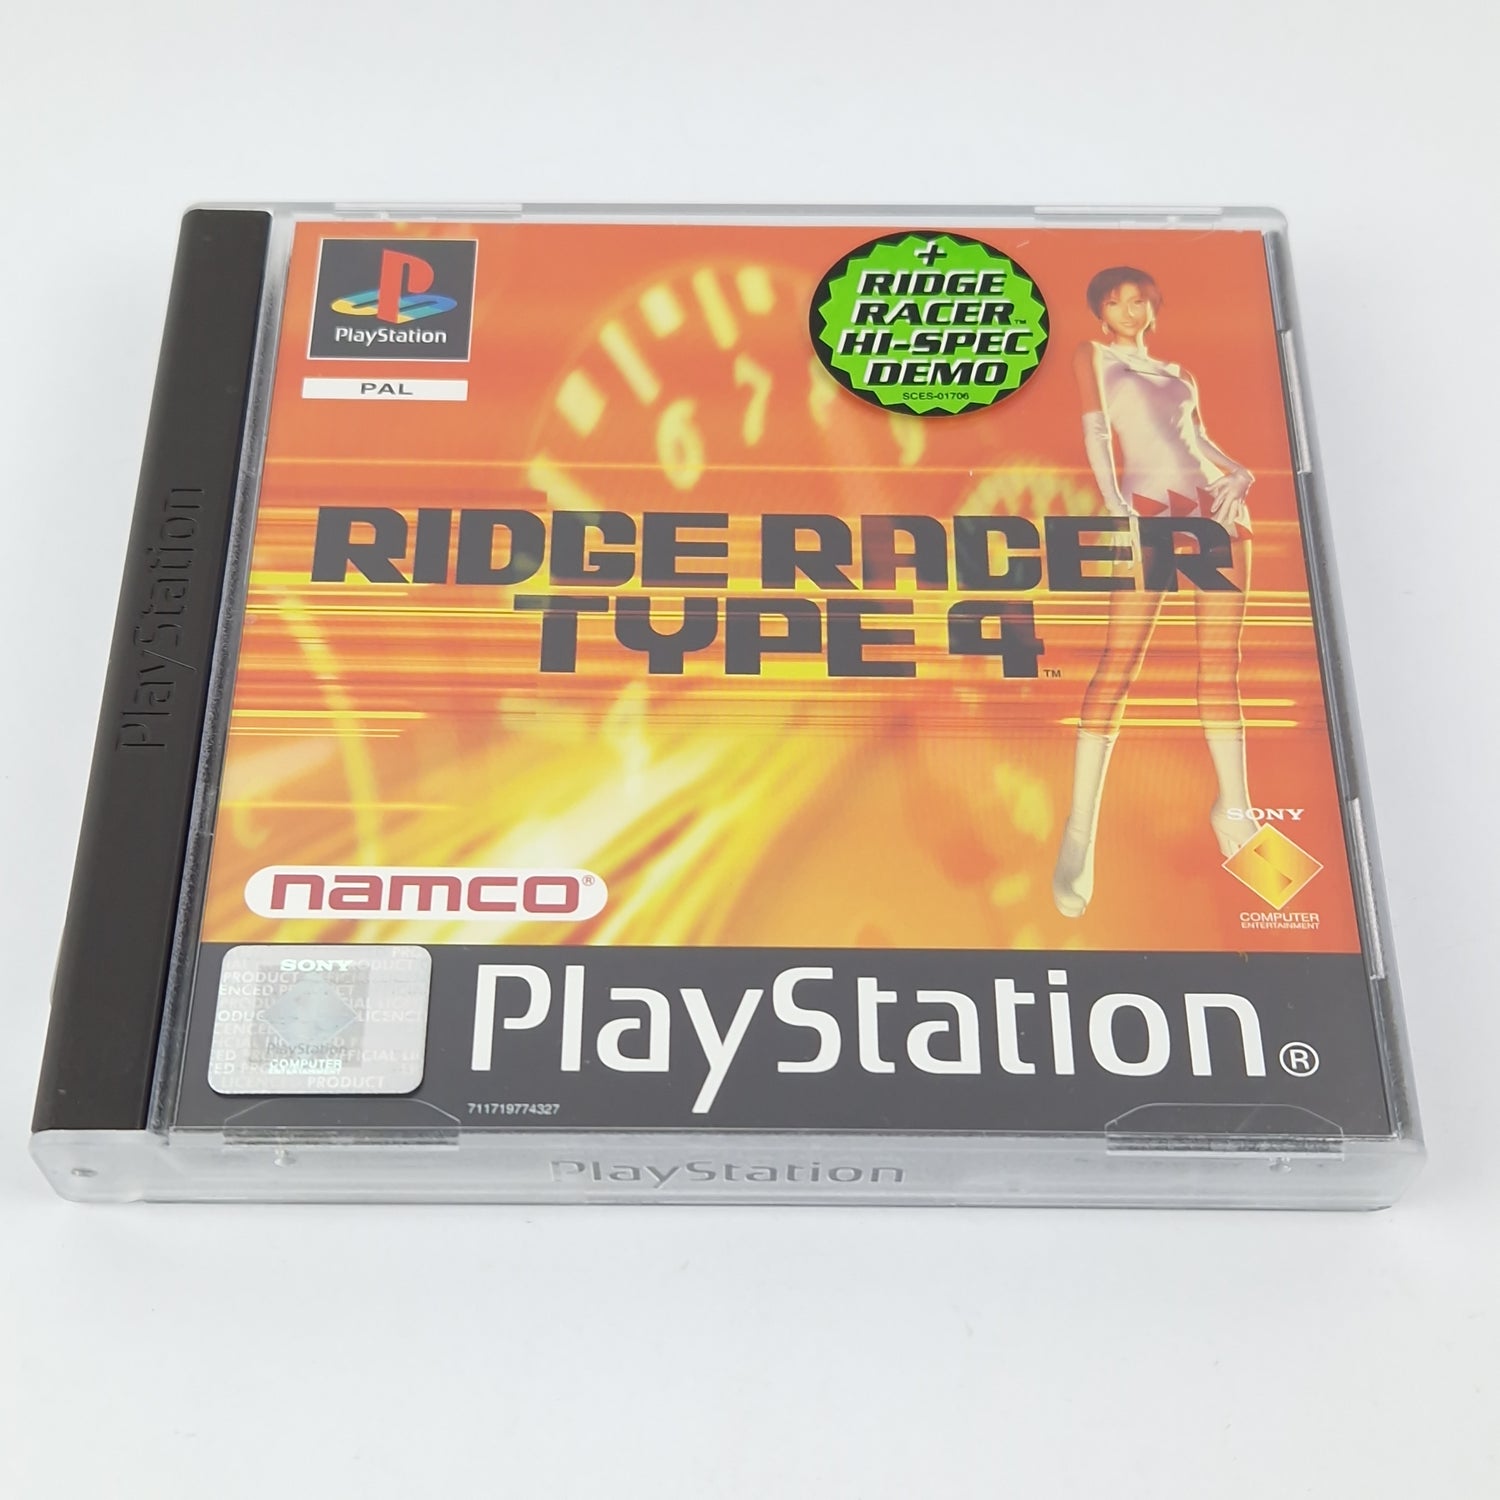 Playstation 1 game: Ridge Racer Type 4 + DEMO - CD instructions OVP | SONY PS1